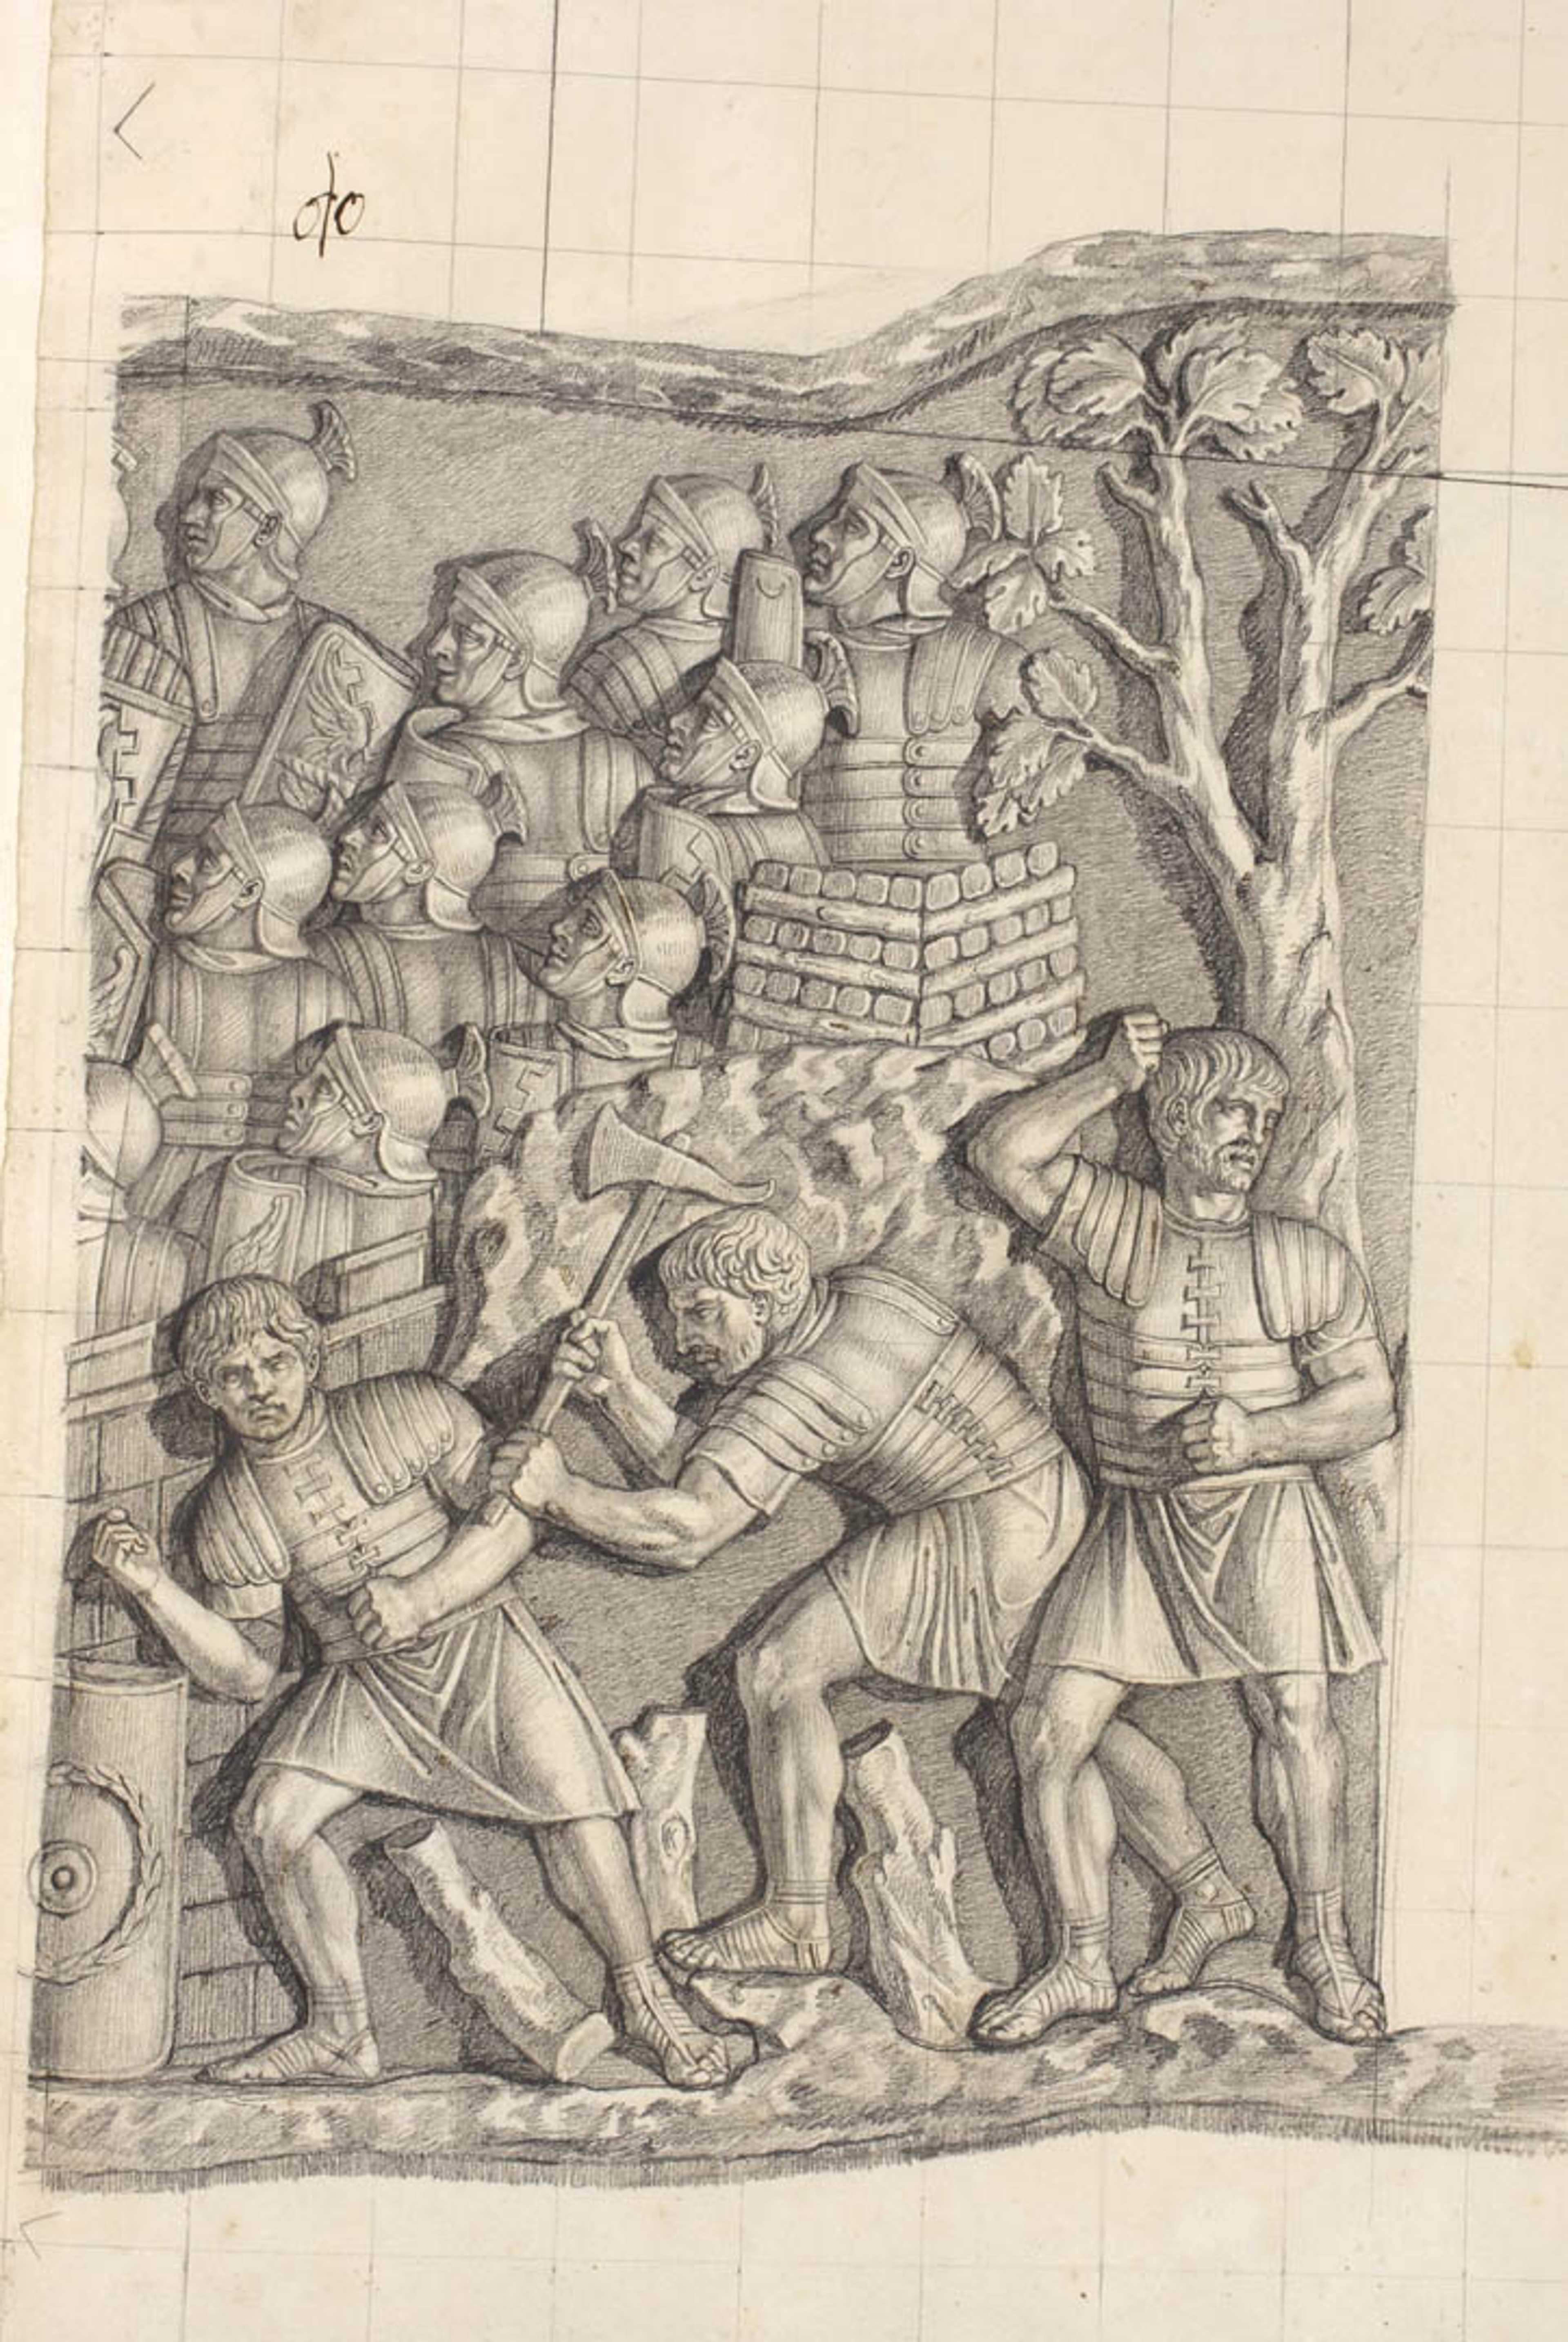 Roman soldiers collect wood to build fortifications